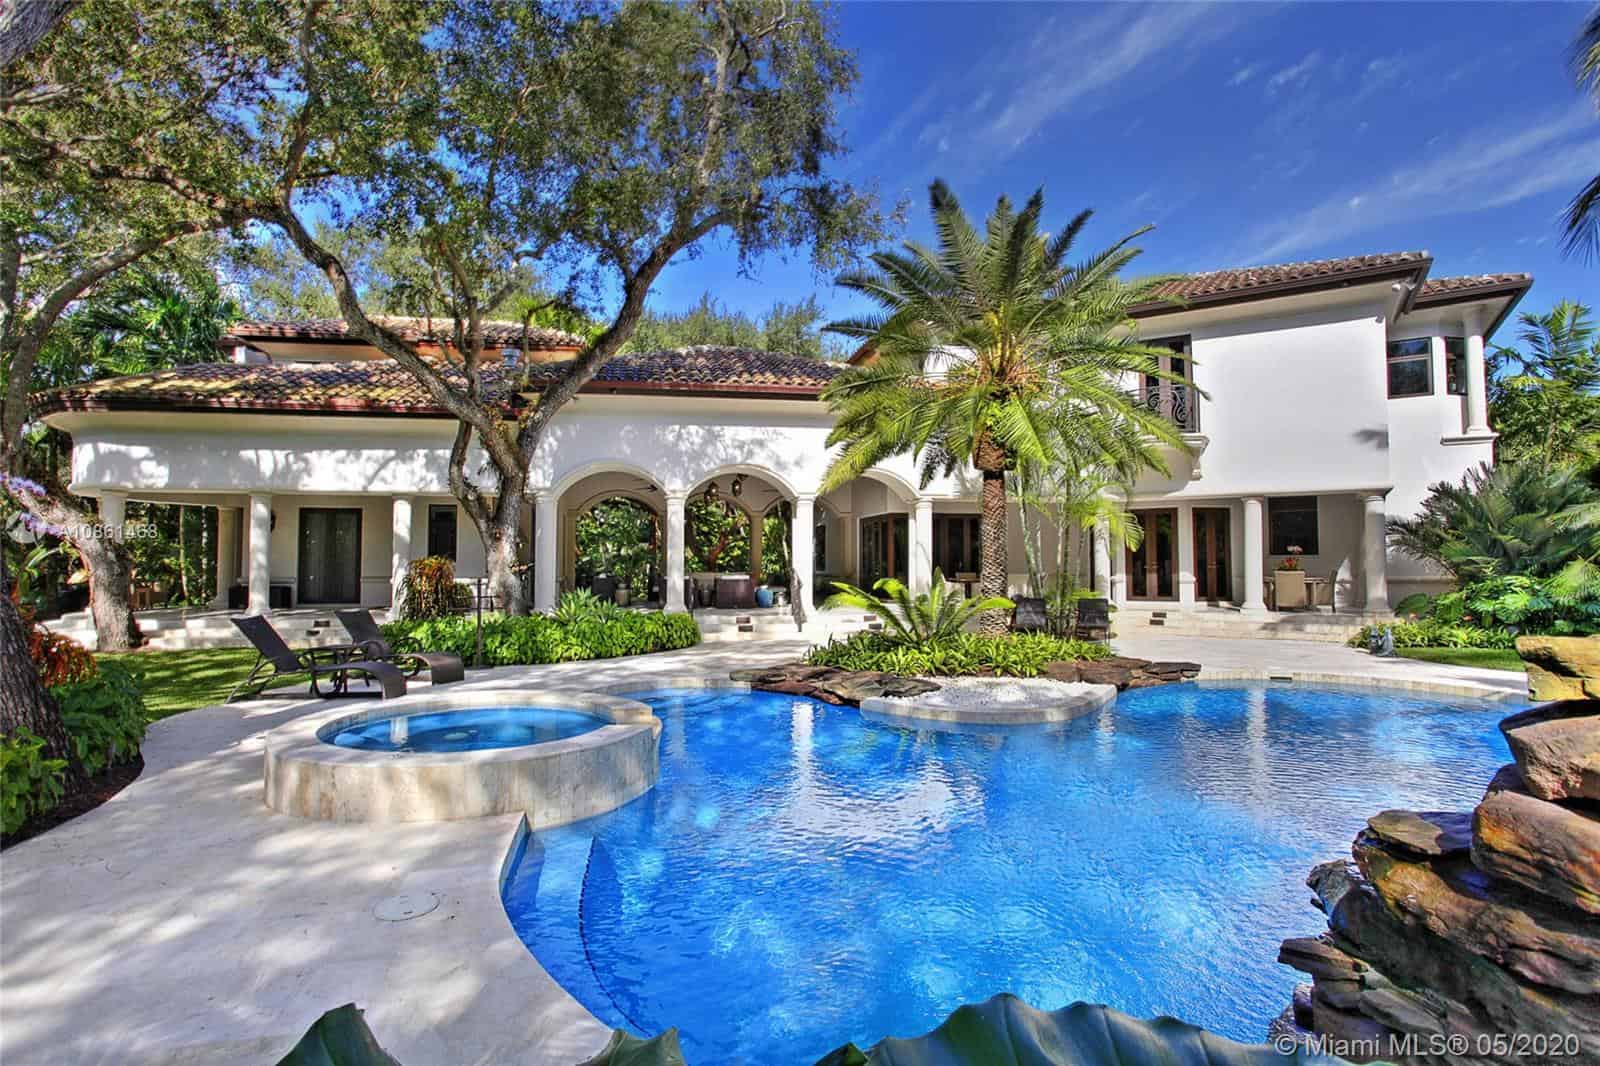 10001 Fairchild Way, Coral Gables, FL 33156: Ultra-Luxury Homes for Sale in Coral Gables